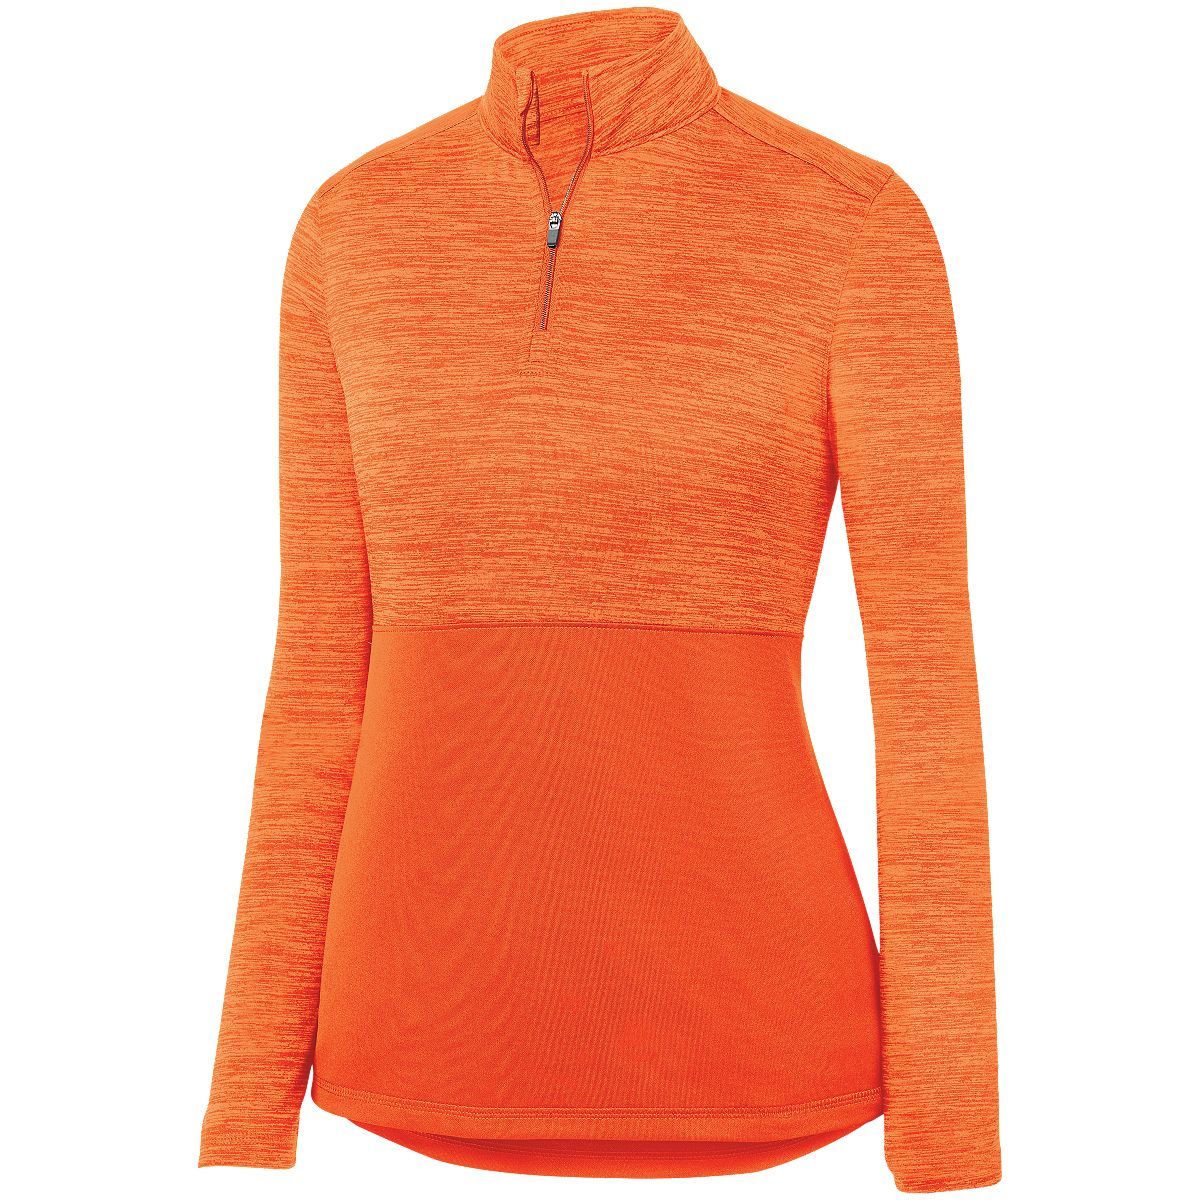 Augusta Sportswear Ladies Shadow Tonal Heather 1/4 Zip Pullover in Orange  -Part of the Ladies, Ladies-Pullover, Augusta-Products, Outerwear, Tonal-Fleece-Collection product lines at KanaleyCreations.com